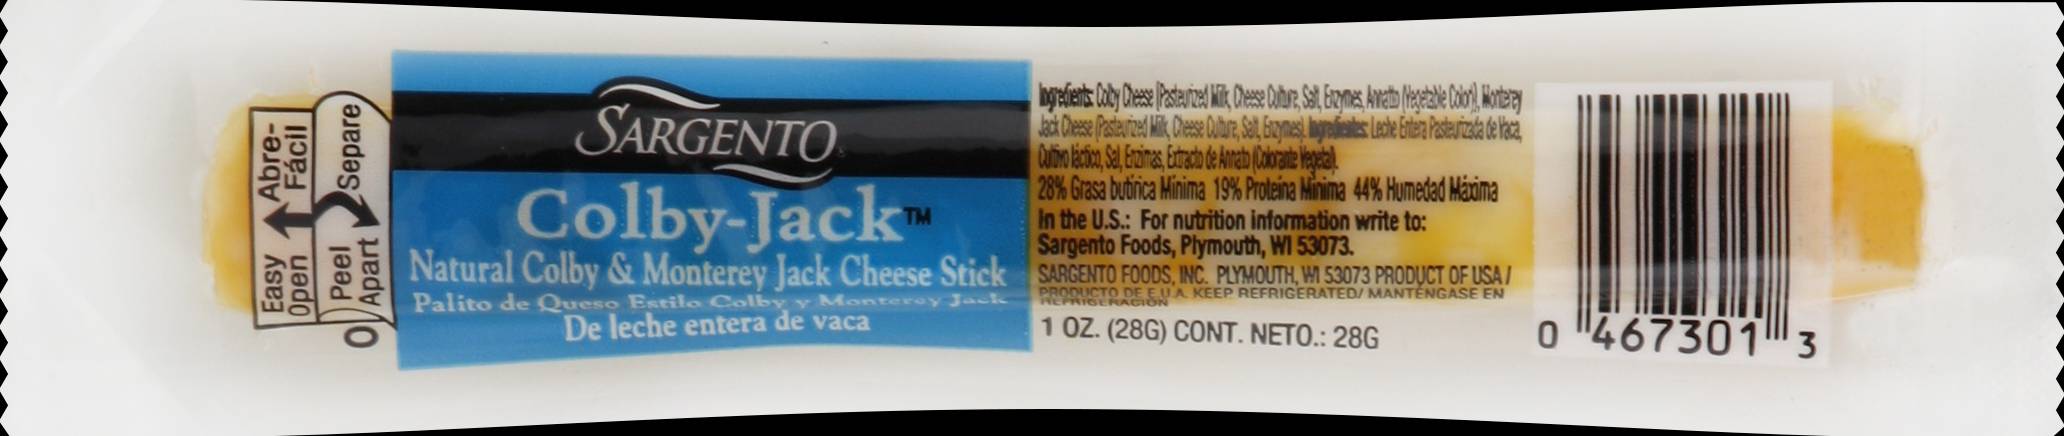 Sargento Colby Jack Cheese Stick 1oz